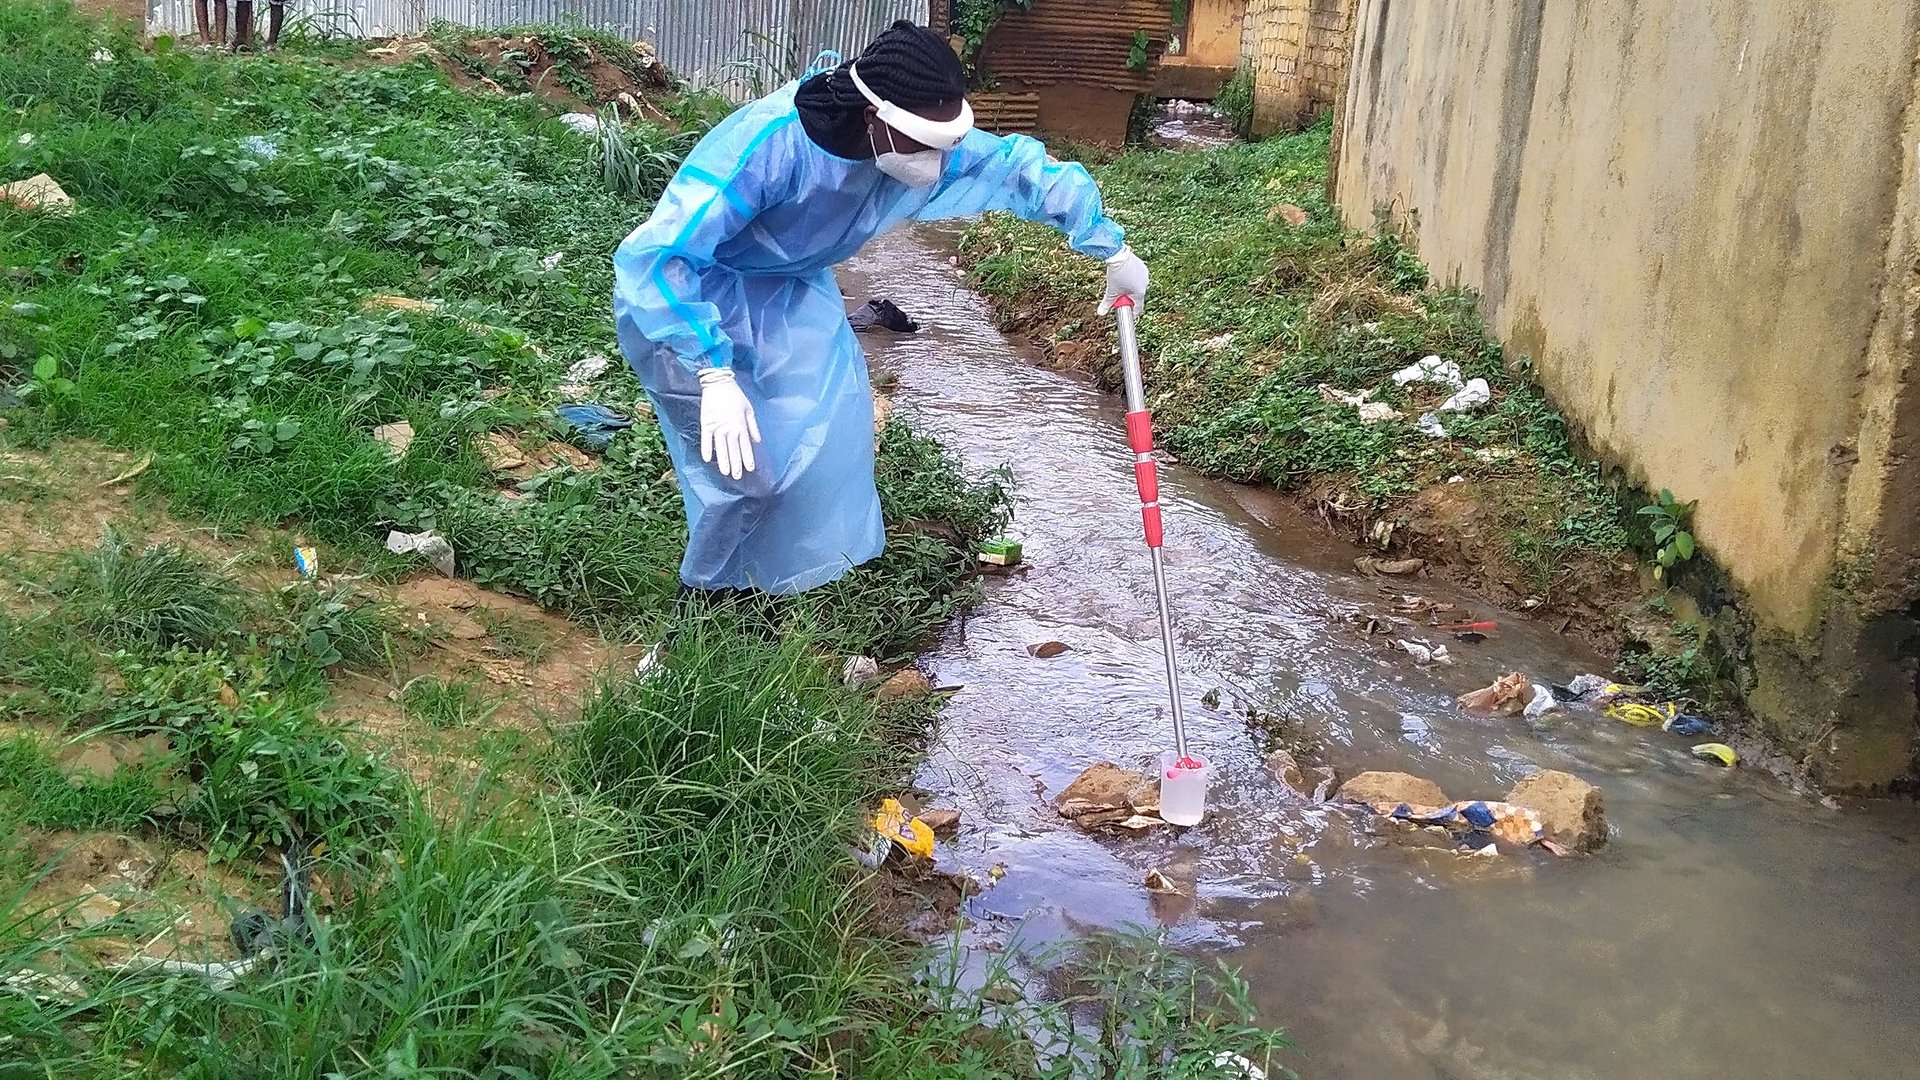 Wastewater-based surveillance of infectious diseases